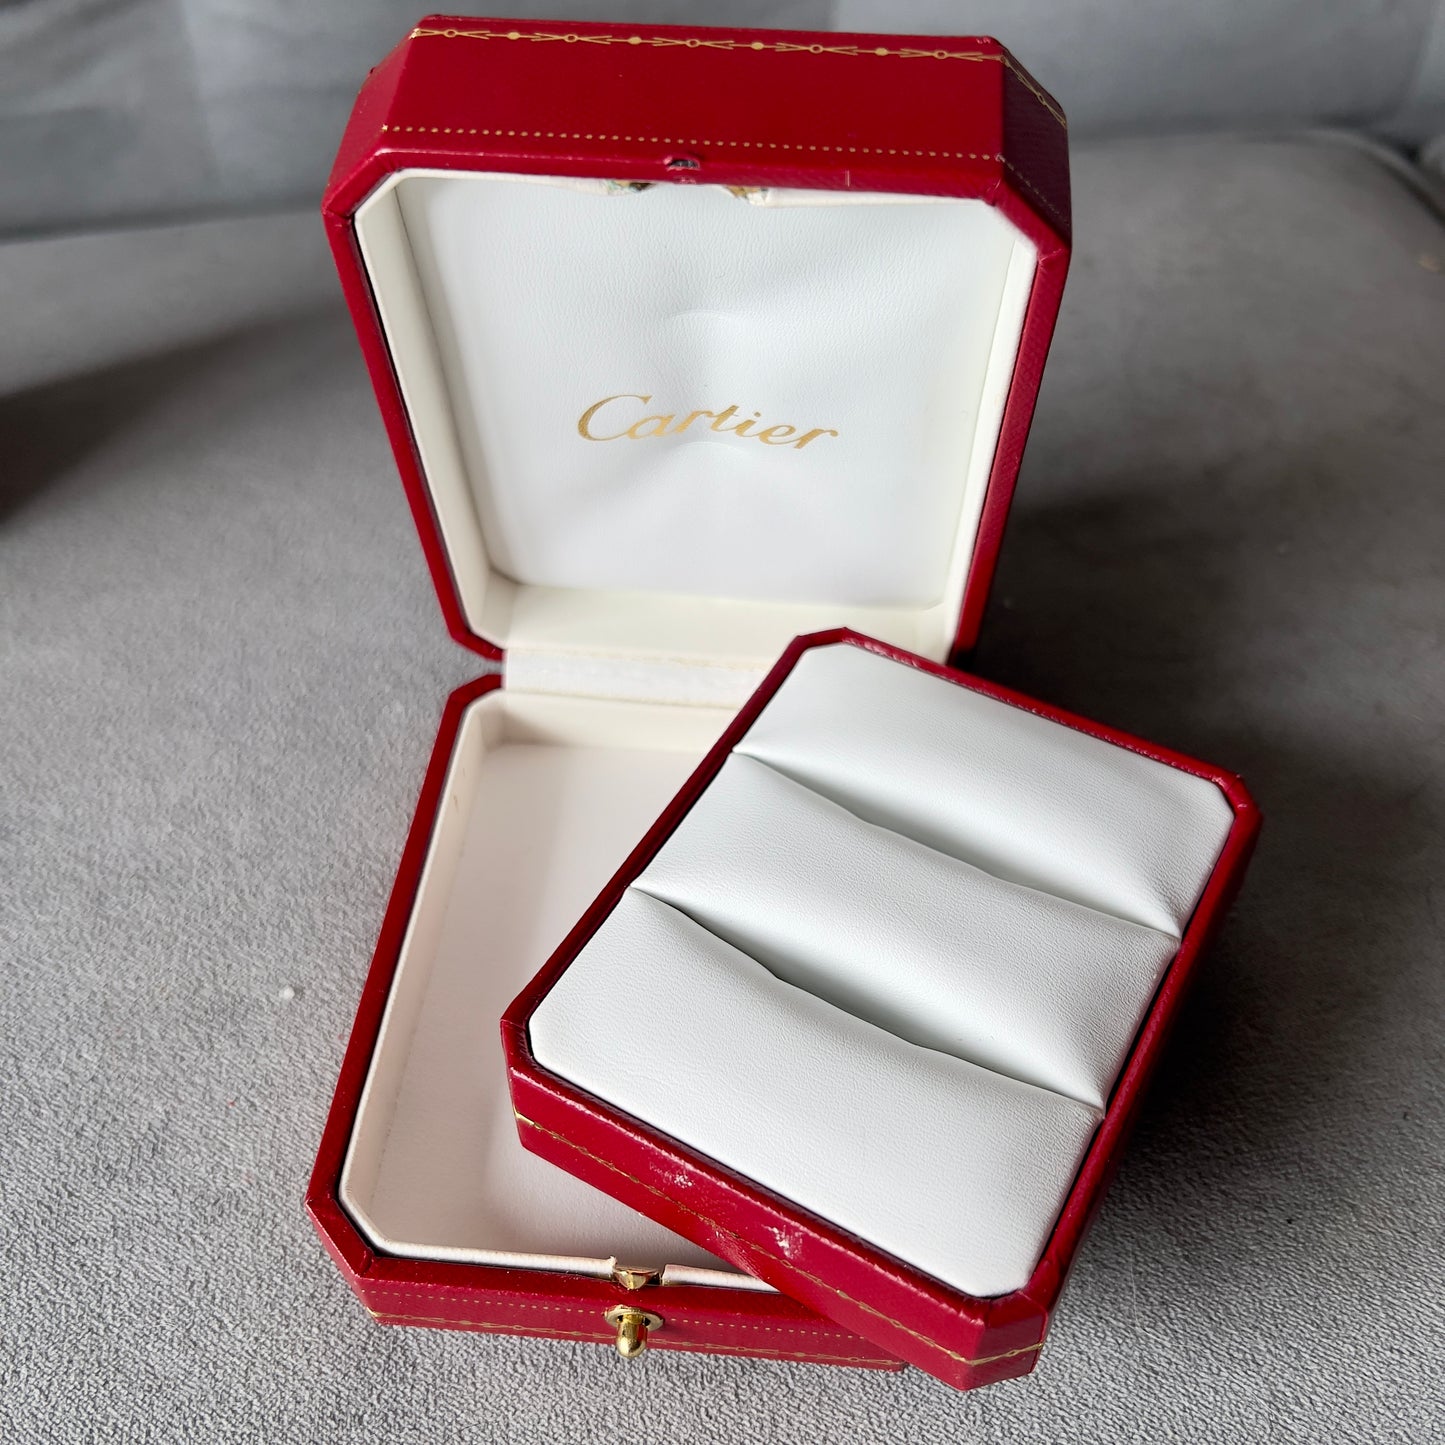 CARTIER Double Alliance Ring Box + Outer Box 4.5x3.60x2 inches